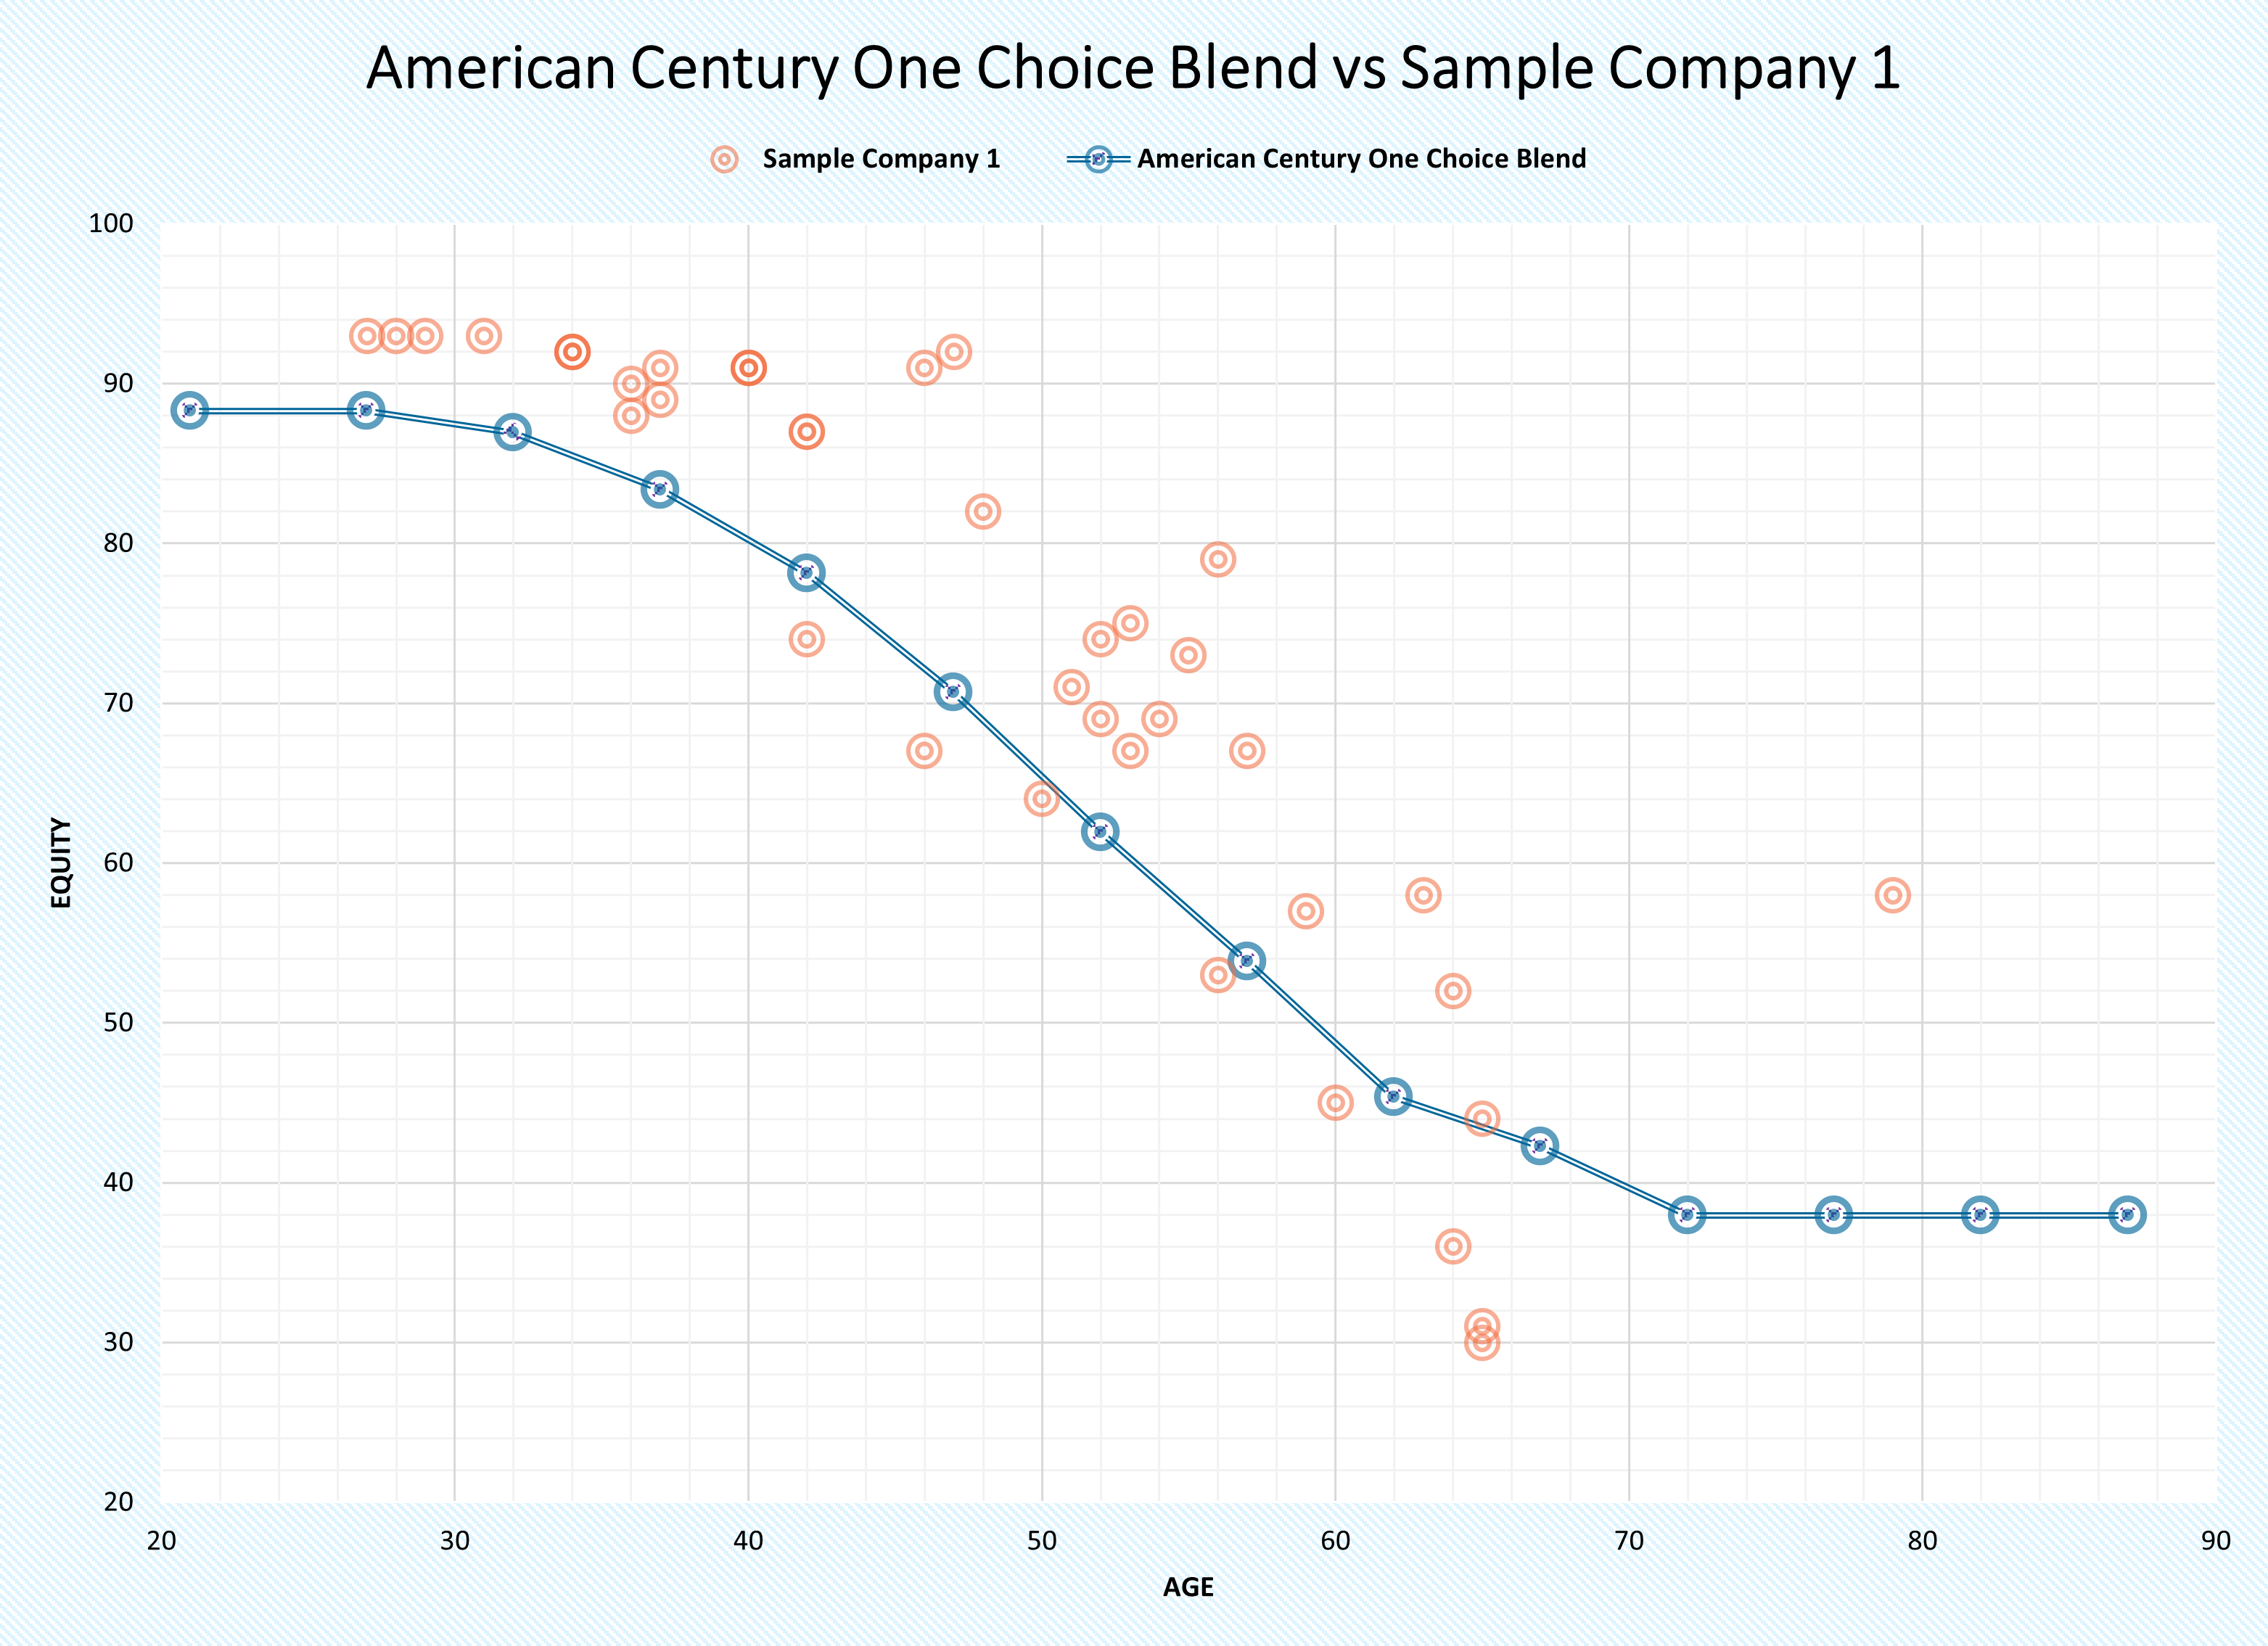 American Century One Choice and Blend vs Sample Company 1